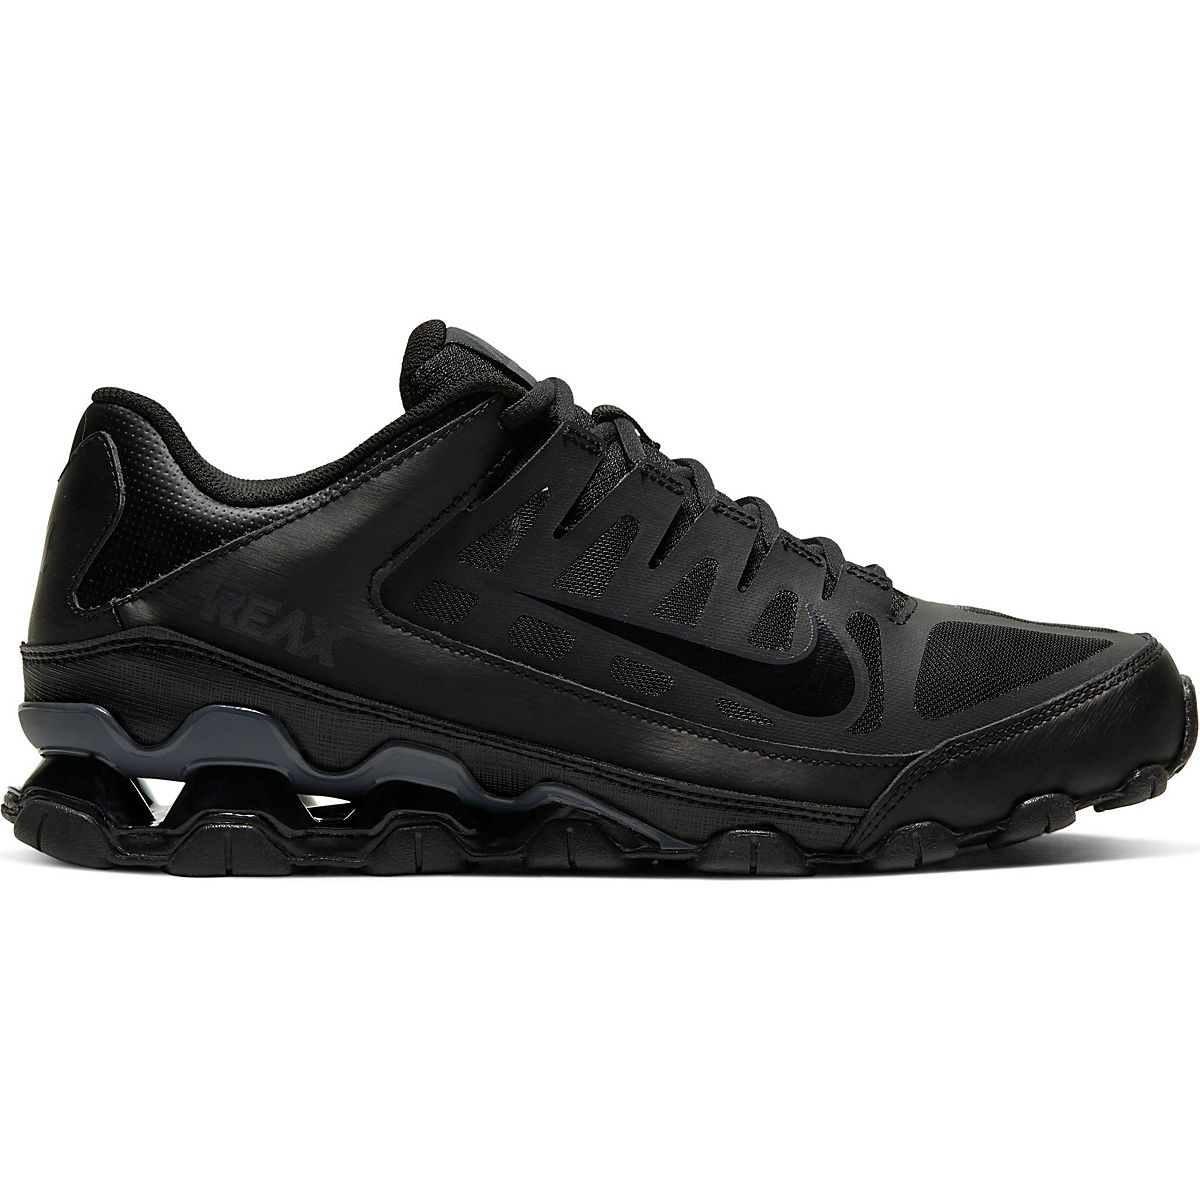 Nike Men's Reax 8 Training Shoes | Free Shipping at Academy